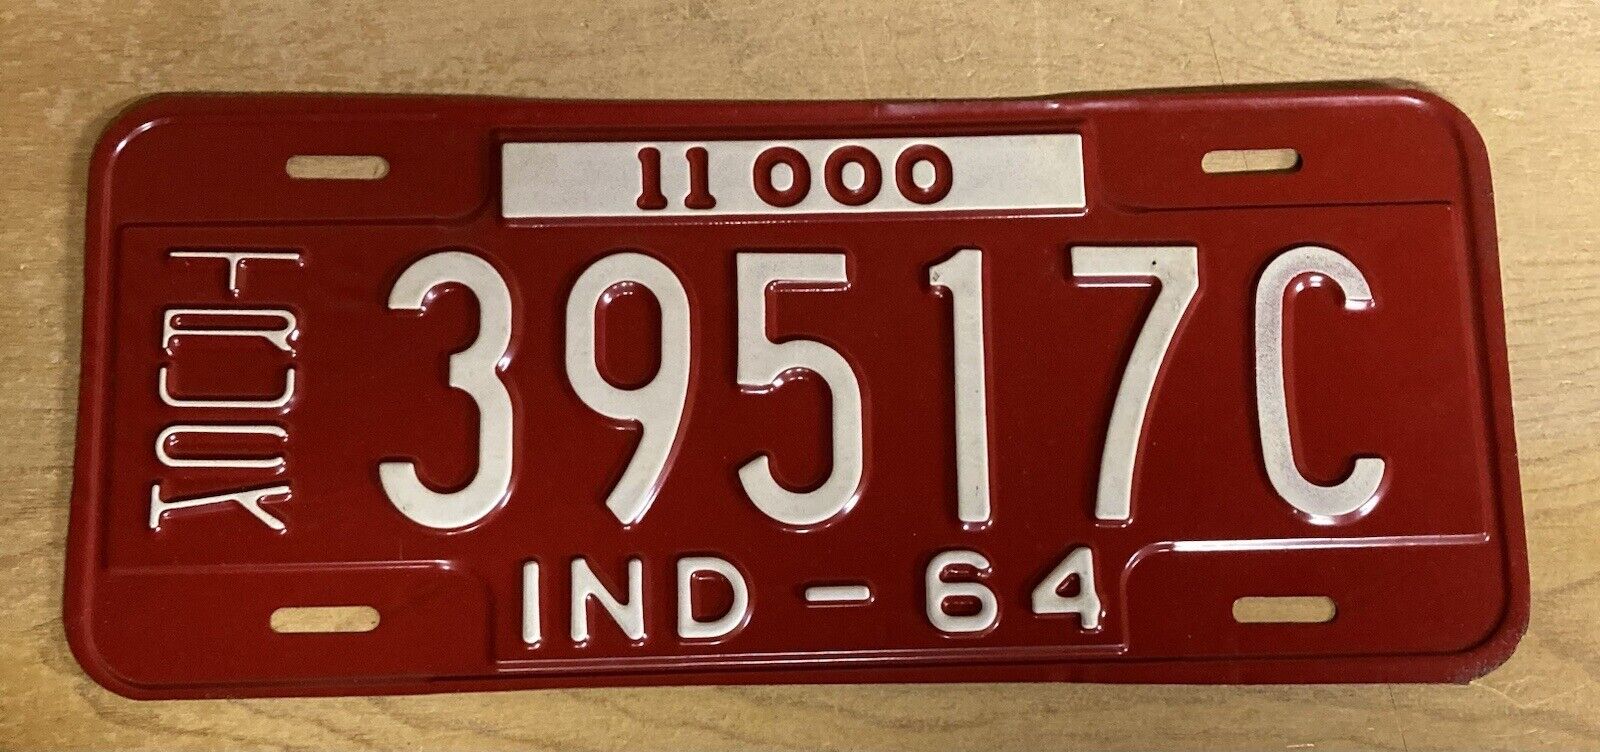 1964 Indiana License Plate Truck